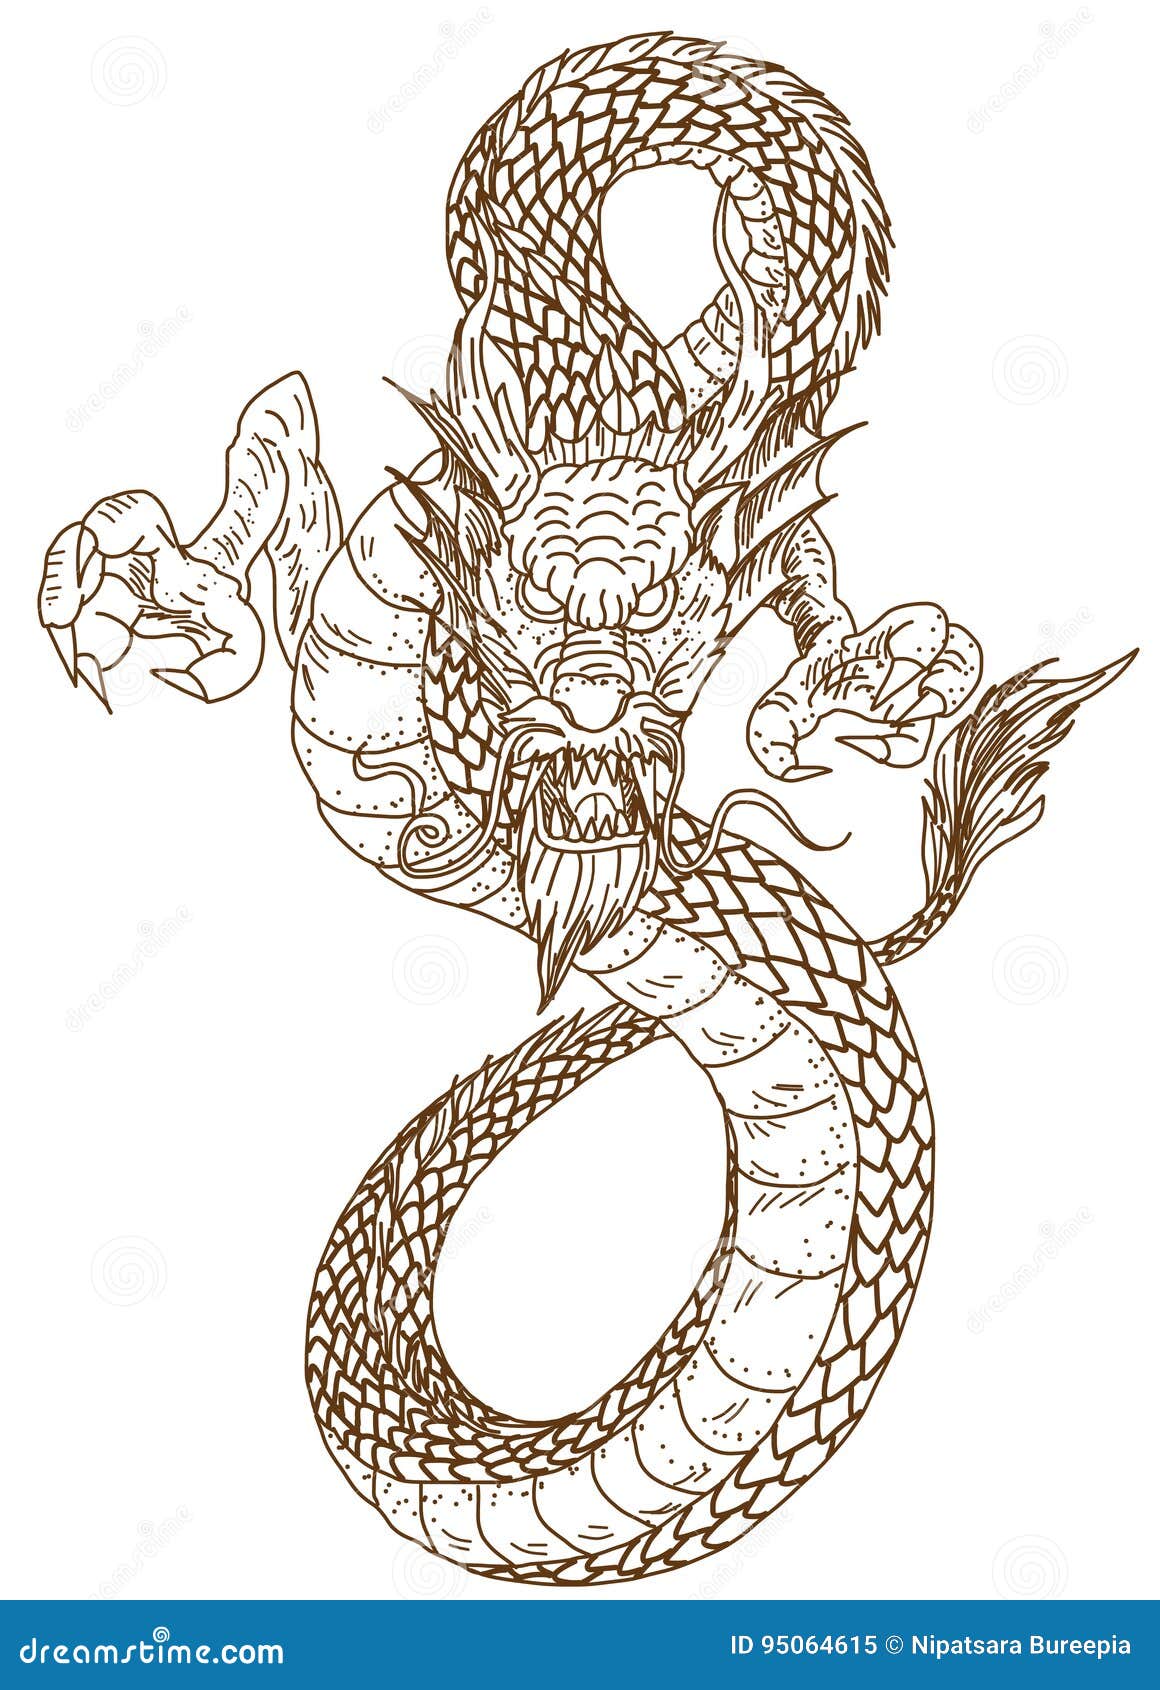 Hand Drawn Chinese Dragon Tattoo Design Stock Vector - Illustration of  character, pattern: 95064615